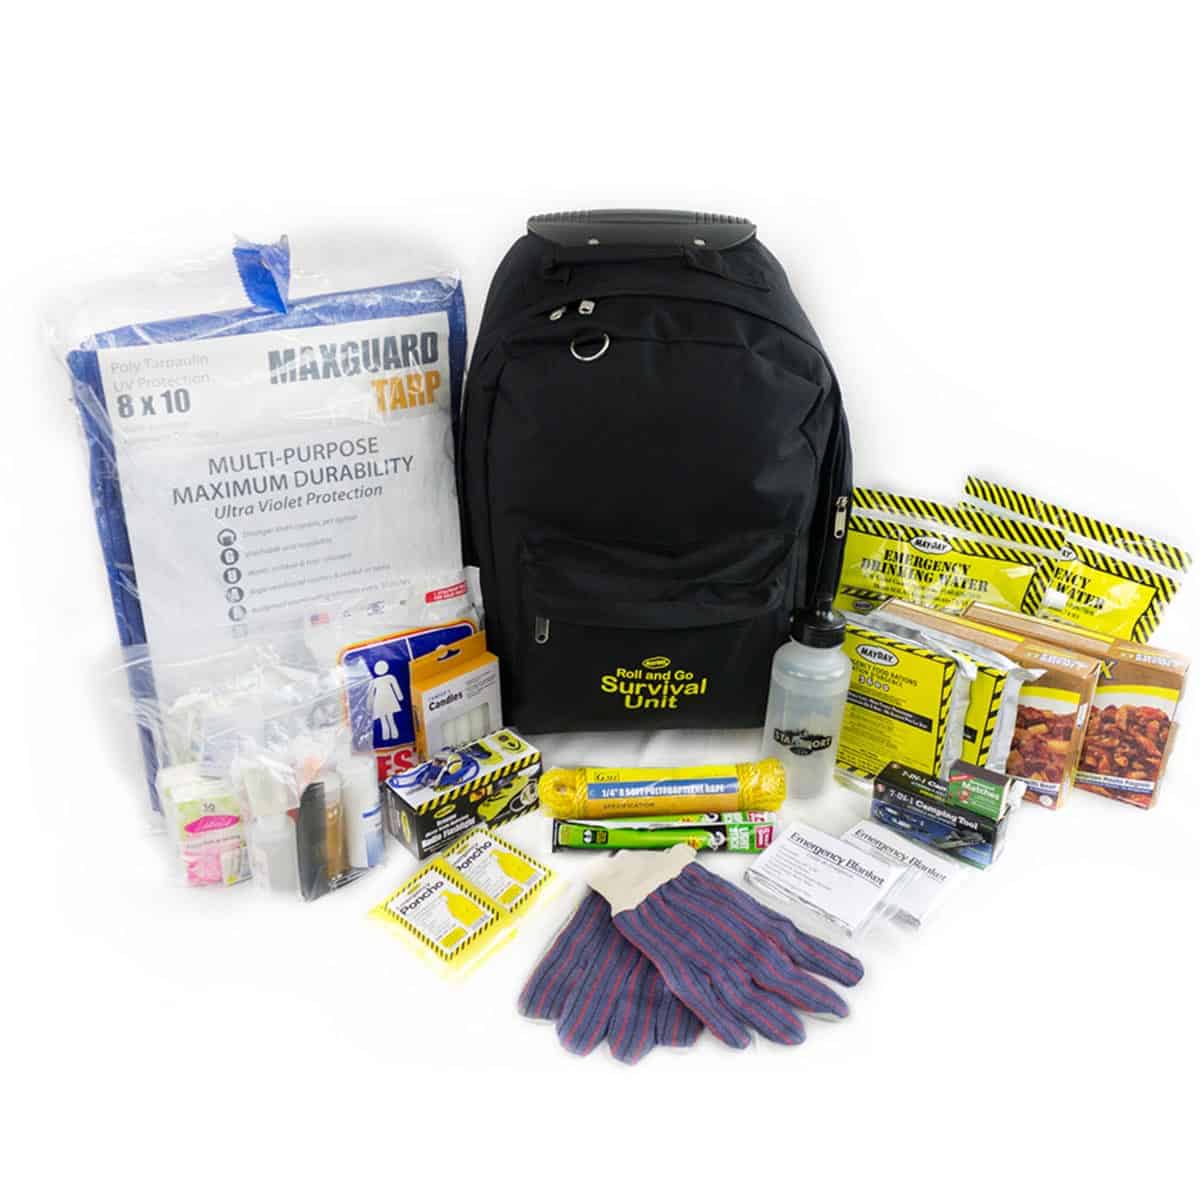 Roll And Go Survival Kit (2 Person Kit)